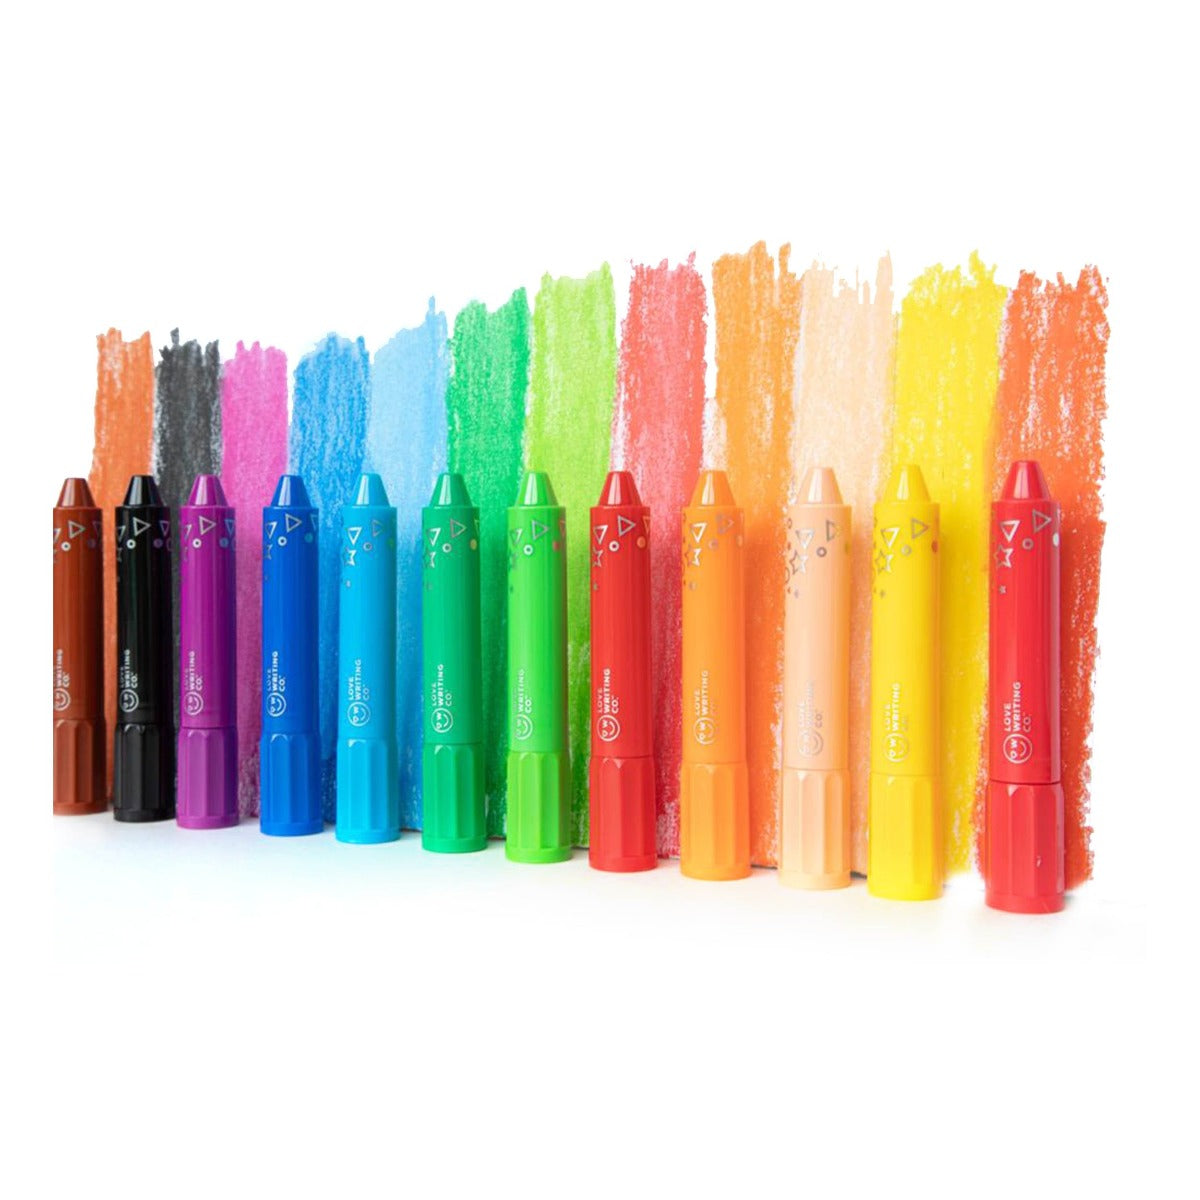 Love Writing Co. Washable Arty Crayons - Pack of 12